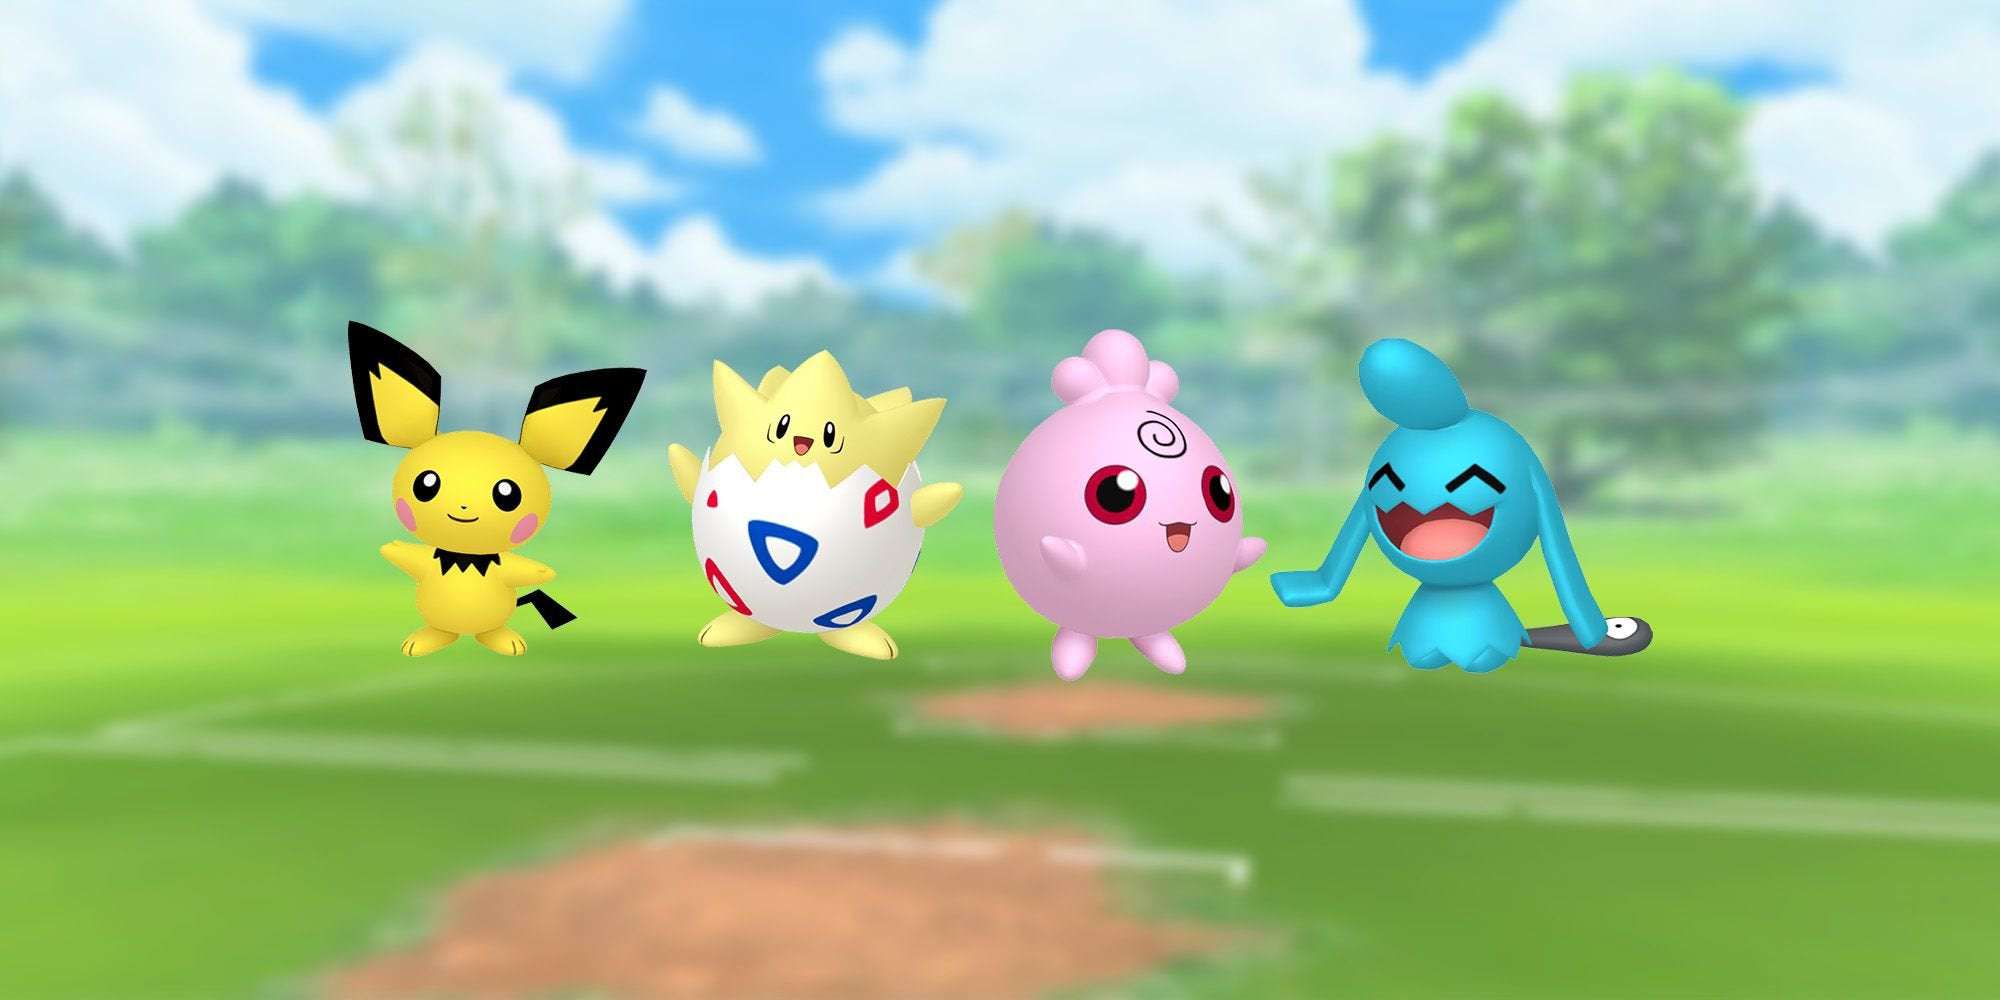 image for Pokemon Go Study Found It Led To "Decrease In Depression-Related Internet Searches"